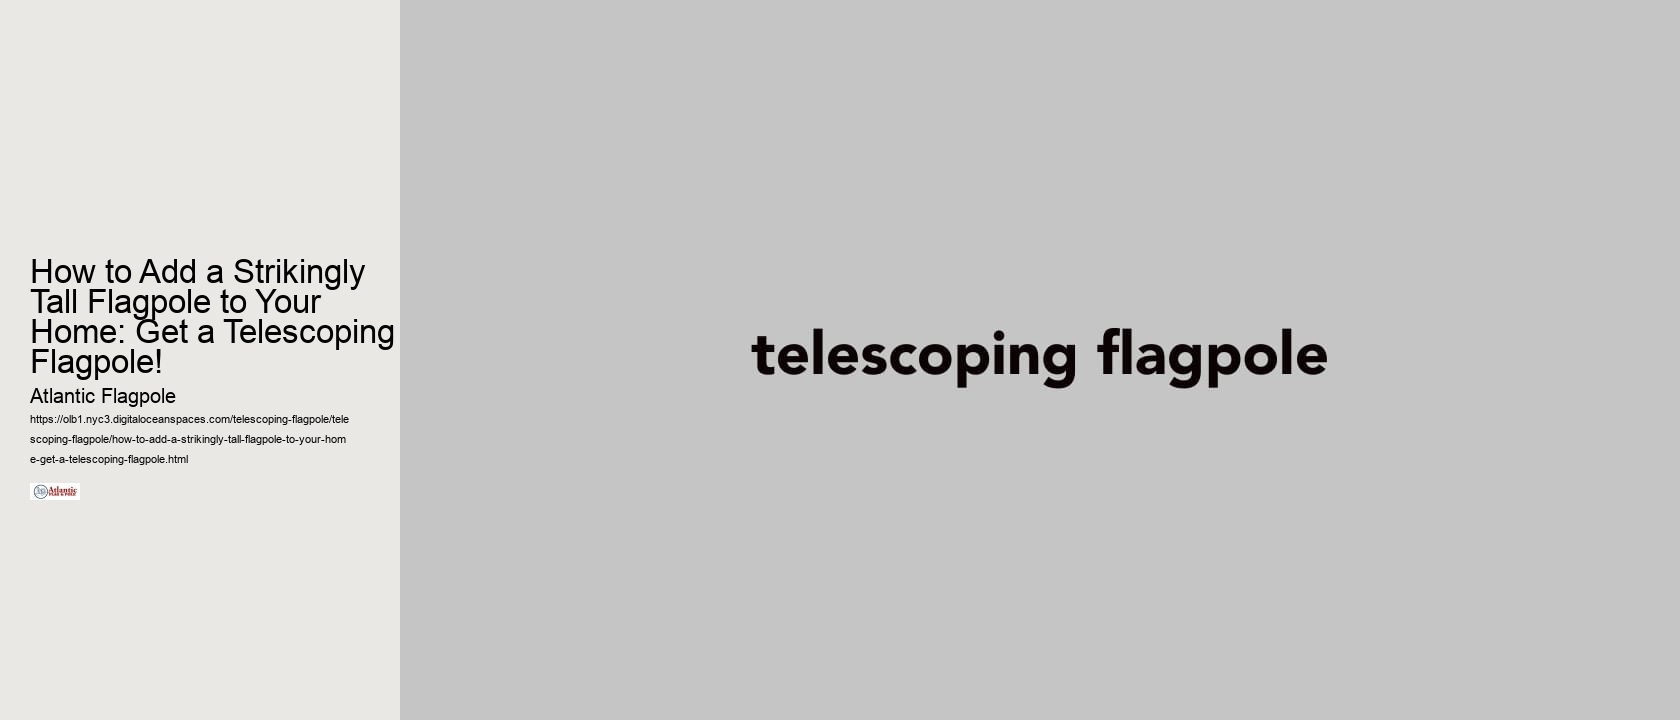 How to Add a Strikingly Tall Flagpole to Your Home: Get a Telescoping Flagpole!